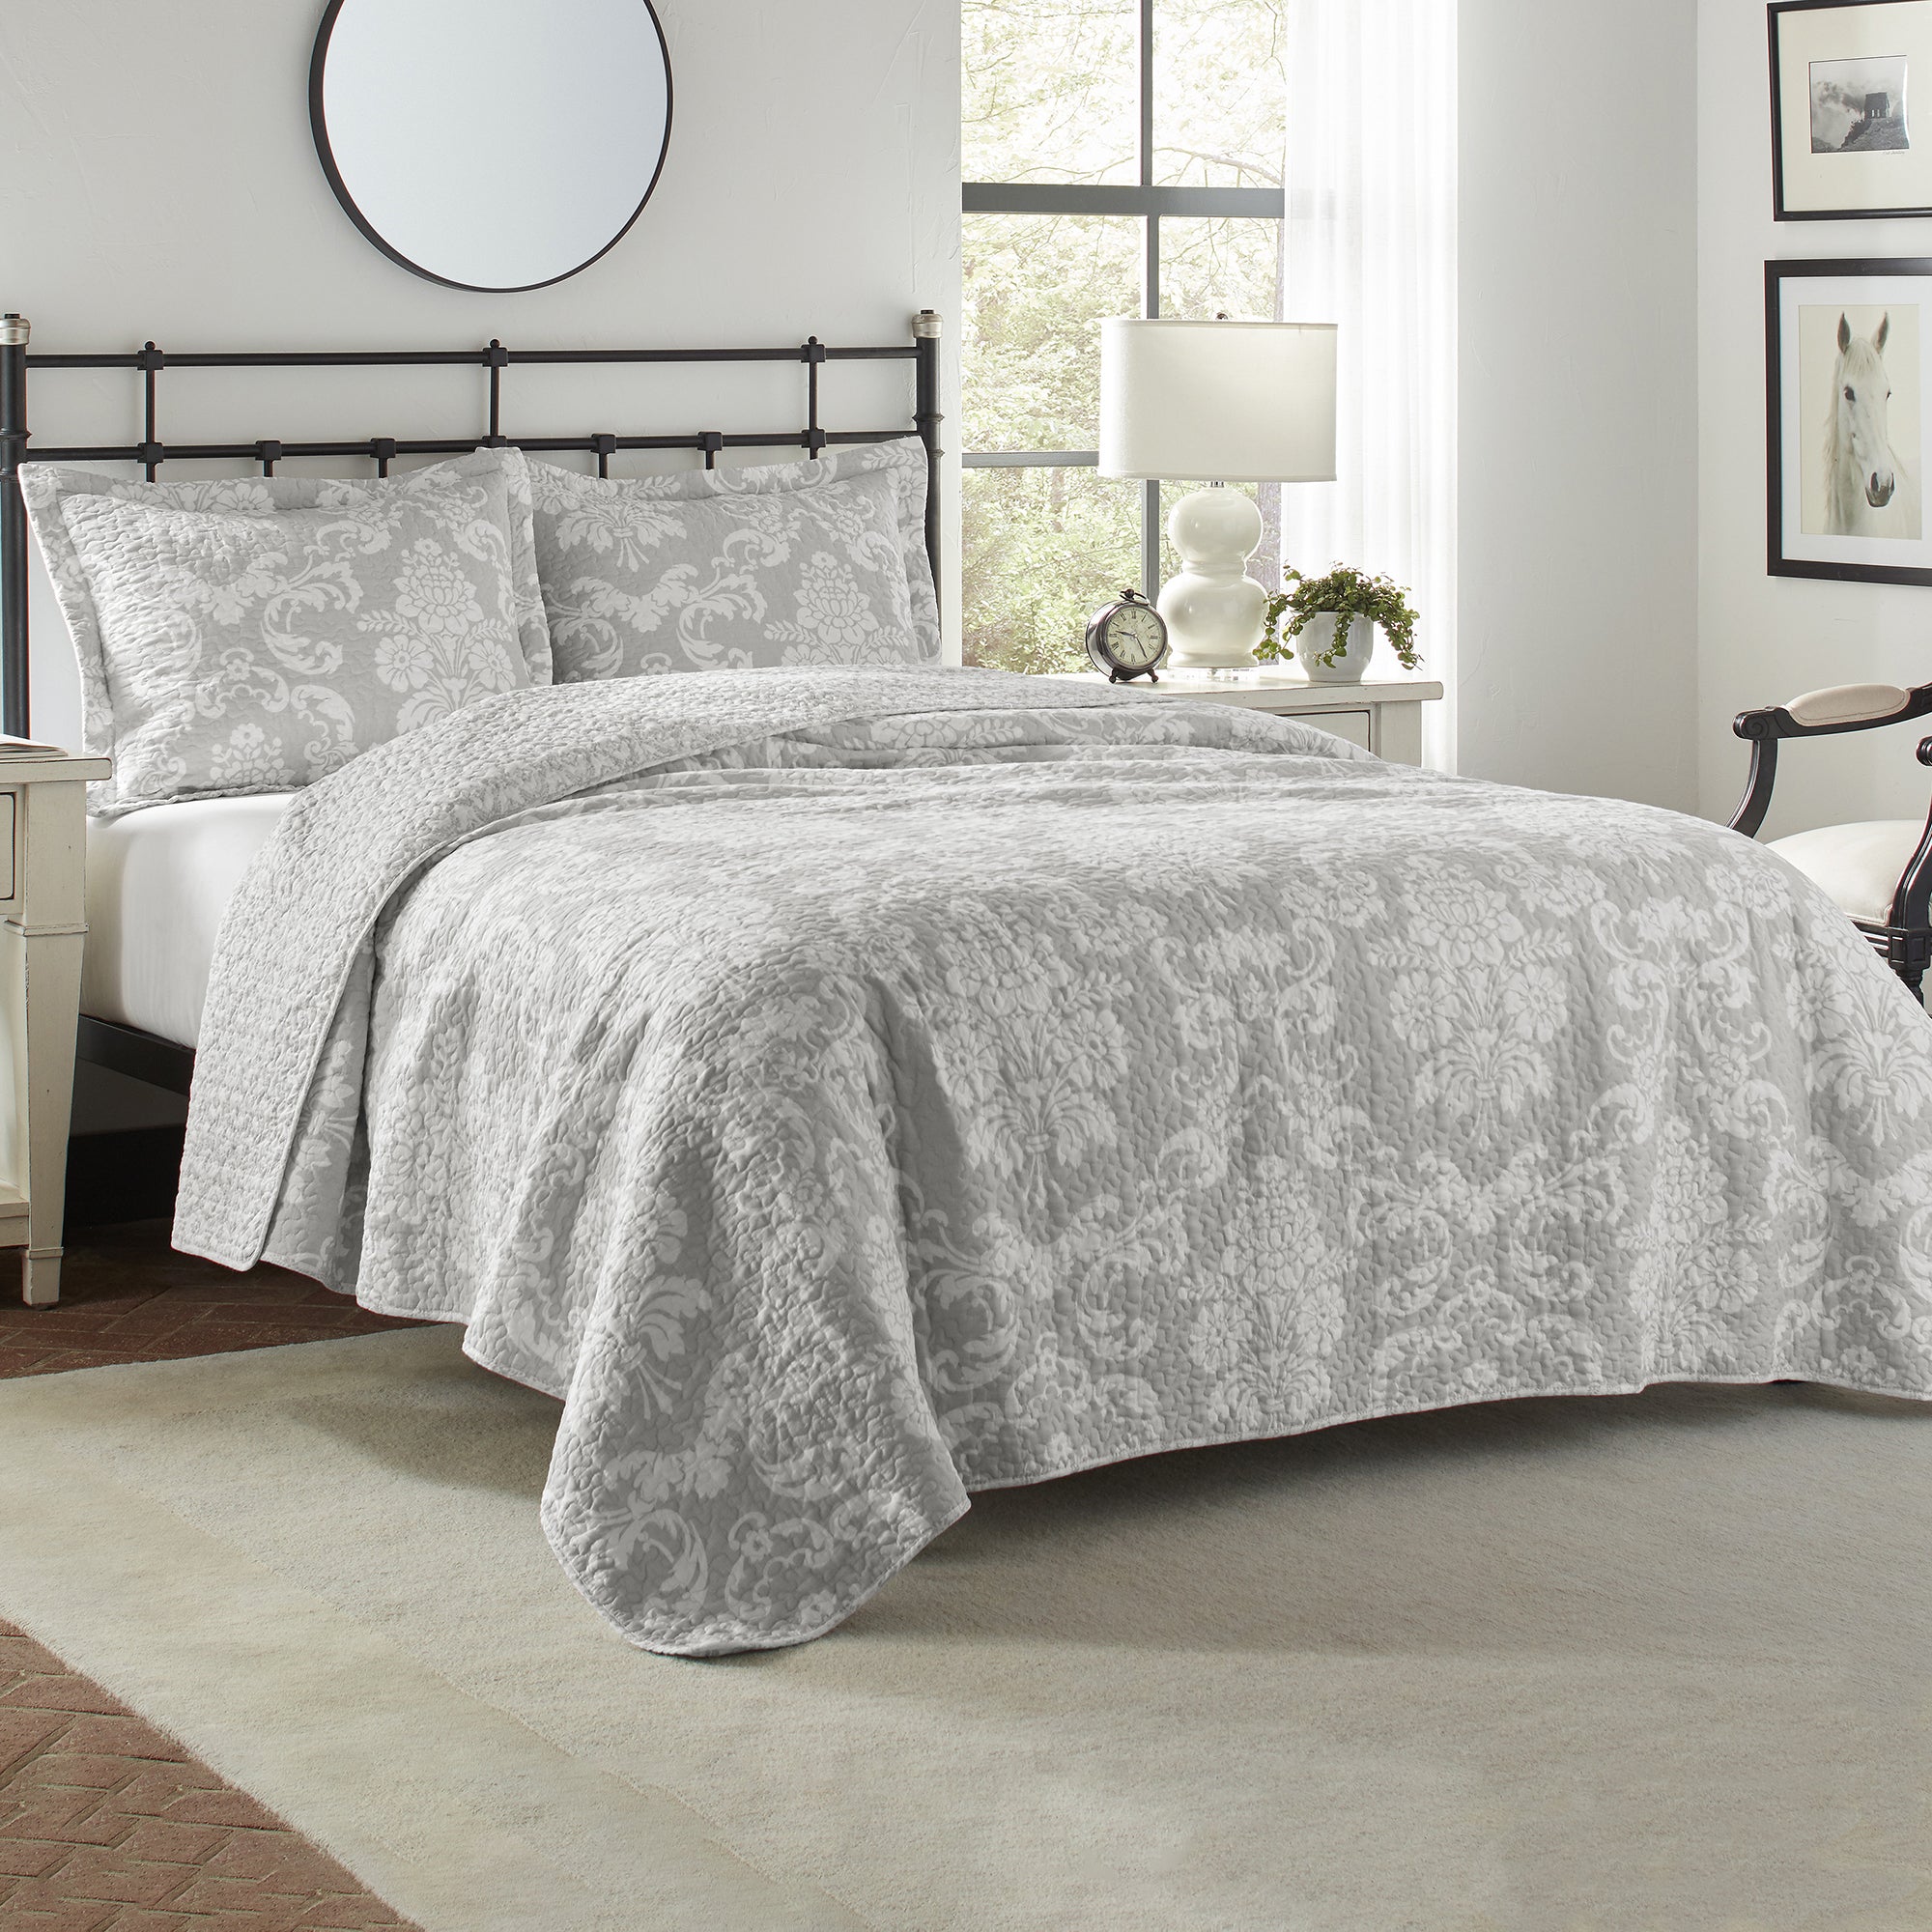 The Venetia Coverlet Set Grey by Laura Ashley is a modern interpretation of a classic damask design and features a grey ground with an ivory damask quilt.